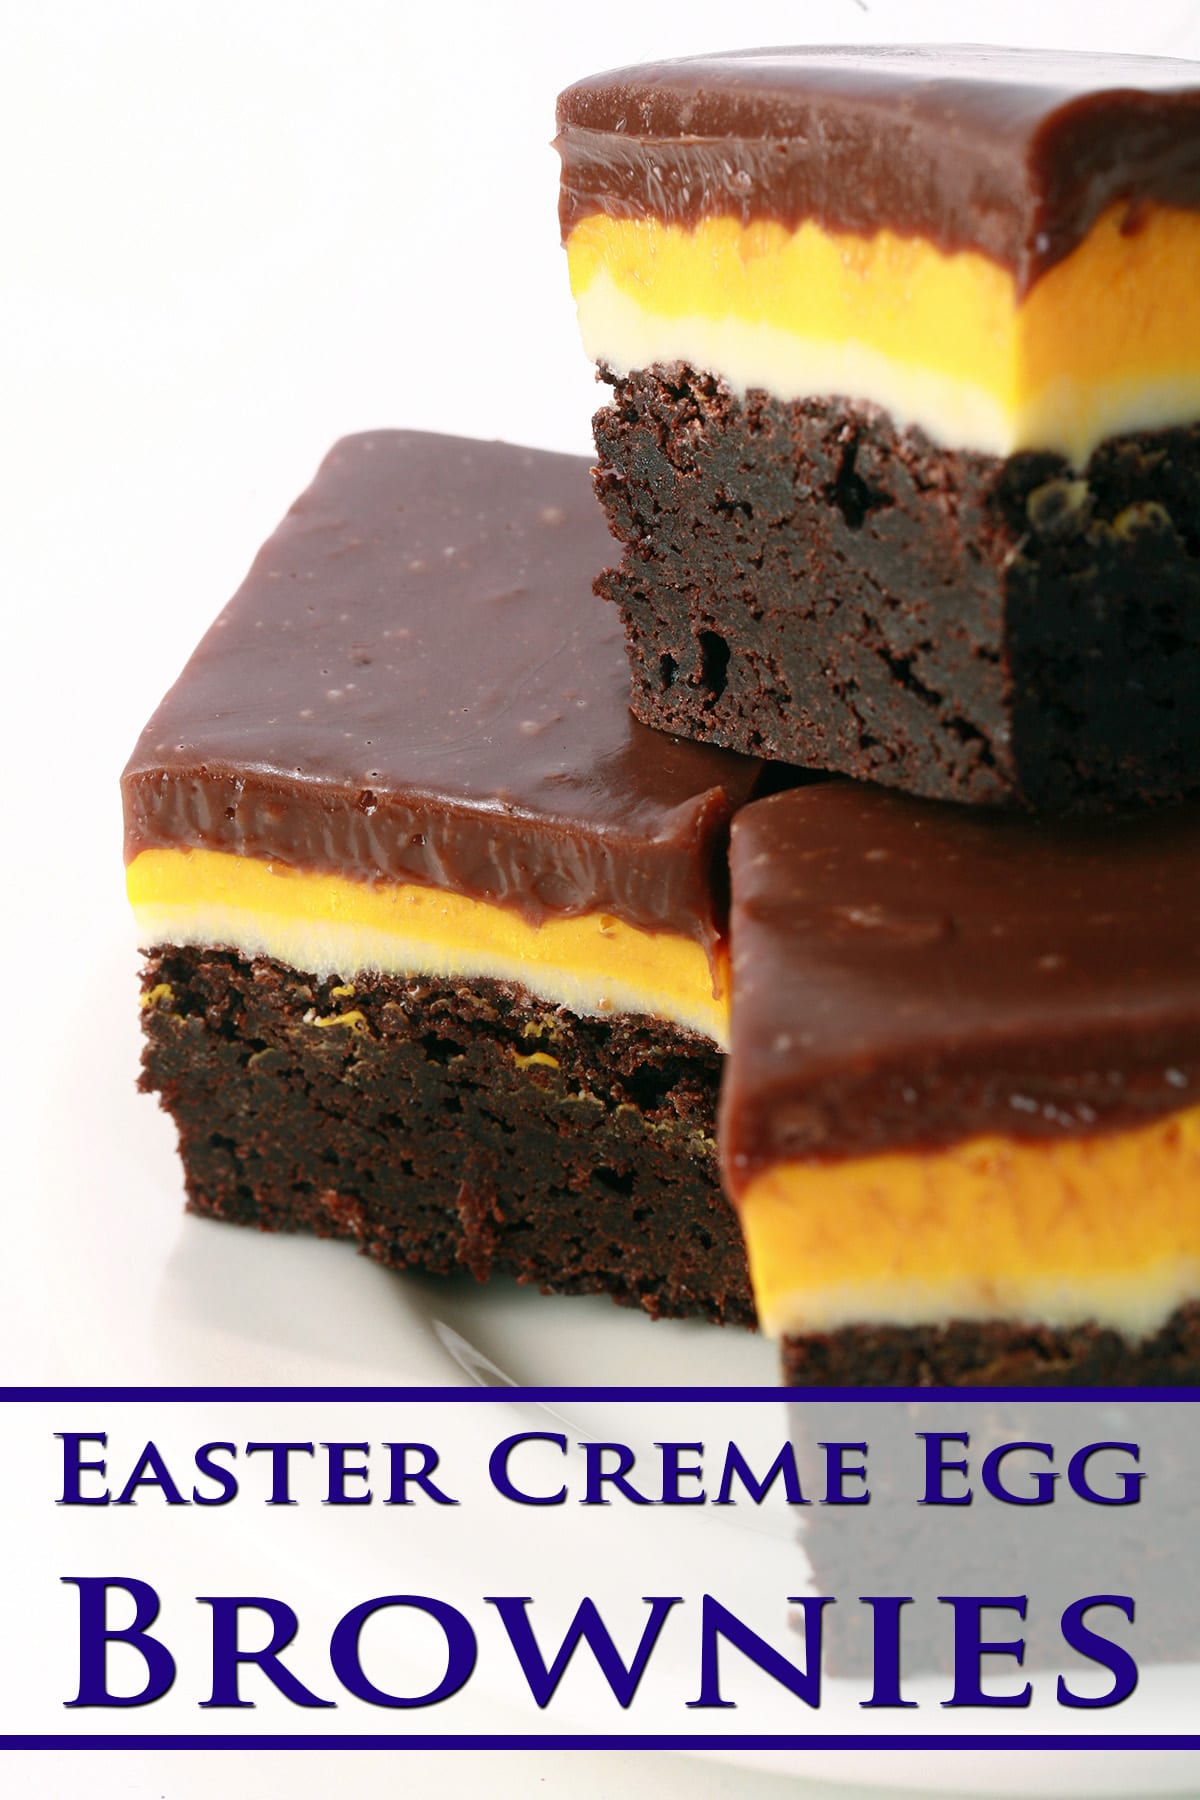 A plate of Easter Creme Egg Brownies.